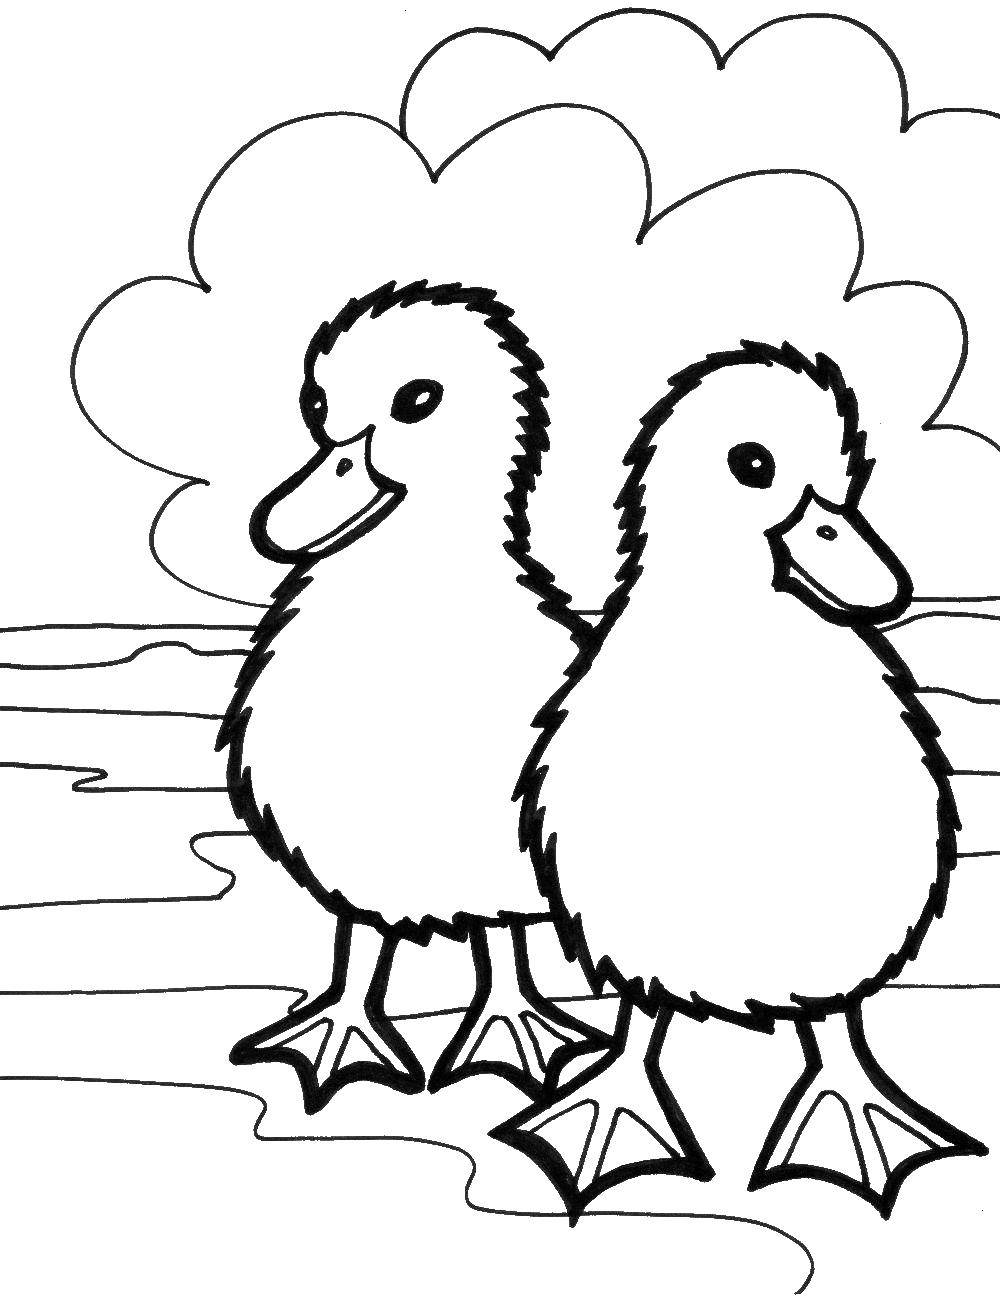 Coloring Two duckling. Category animals. Tags:  duck, bird.